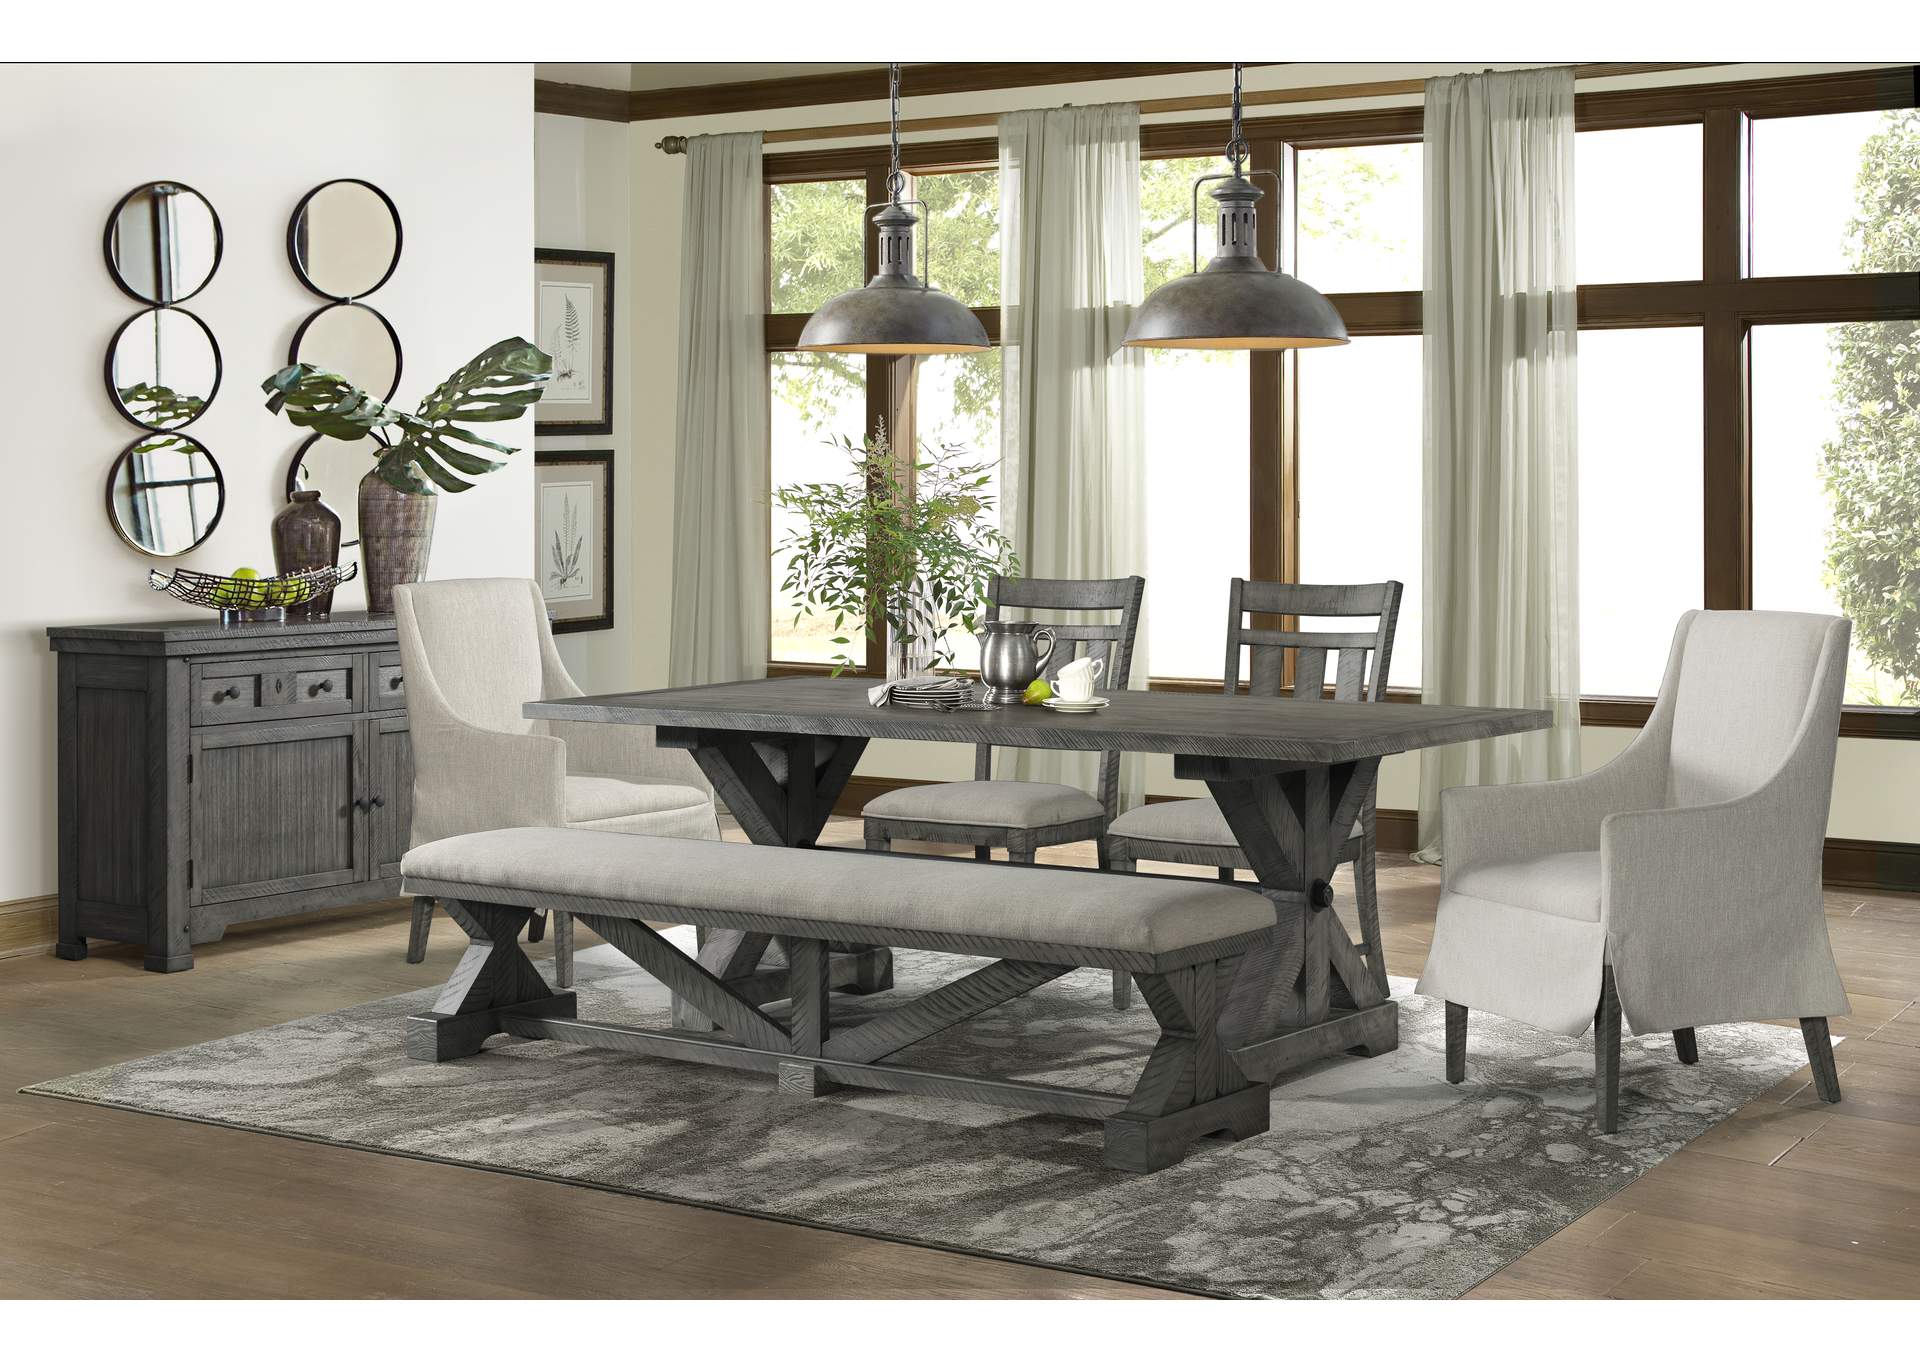 5062 Old Forge Trestle Dining Table Sit, Trestle Dining Table Set